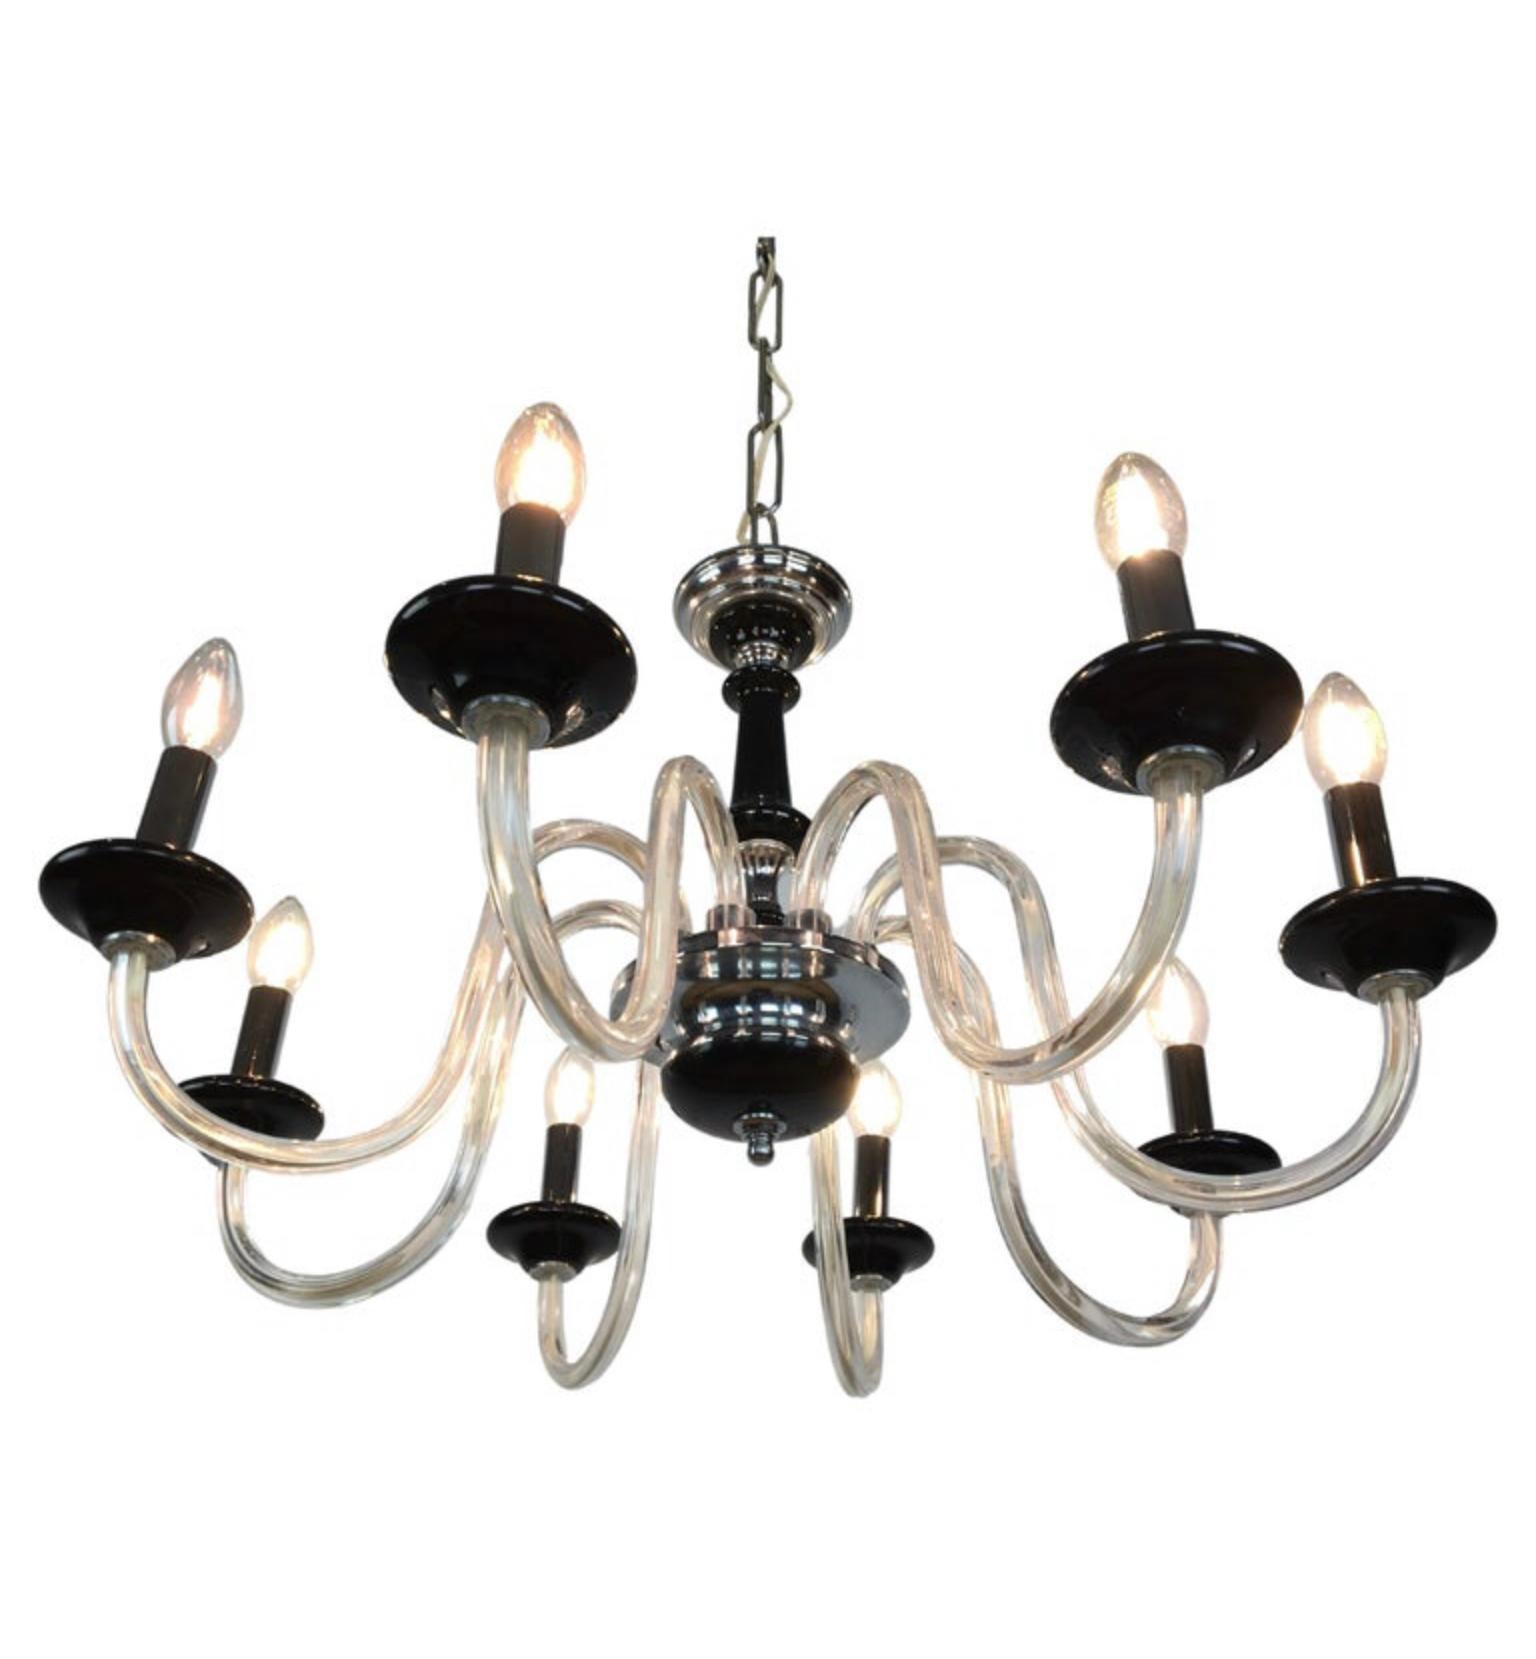 8-armed Murano glass chandeliers in different colors: 
Black - orange - green and blue turquoise. 
Mid-20th Century ceiling lights with 8 curling arms.
Vintage Italian chandeliers or ceiling lights with colored murano glass details and chromed tube